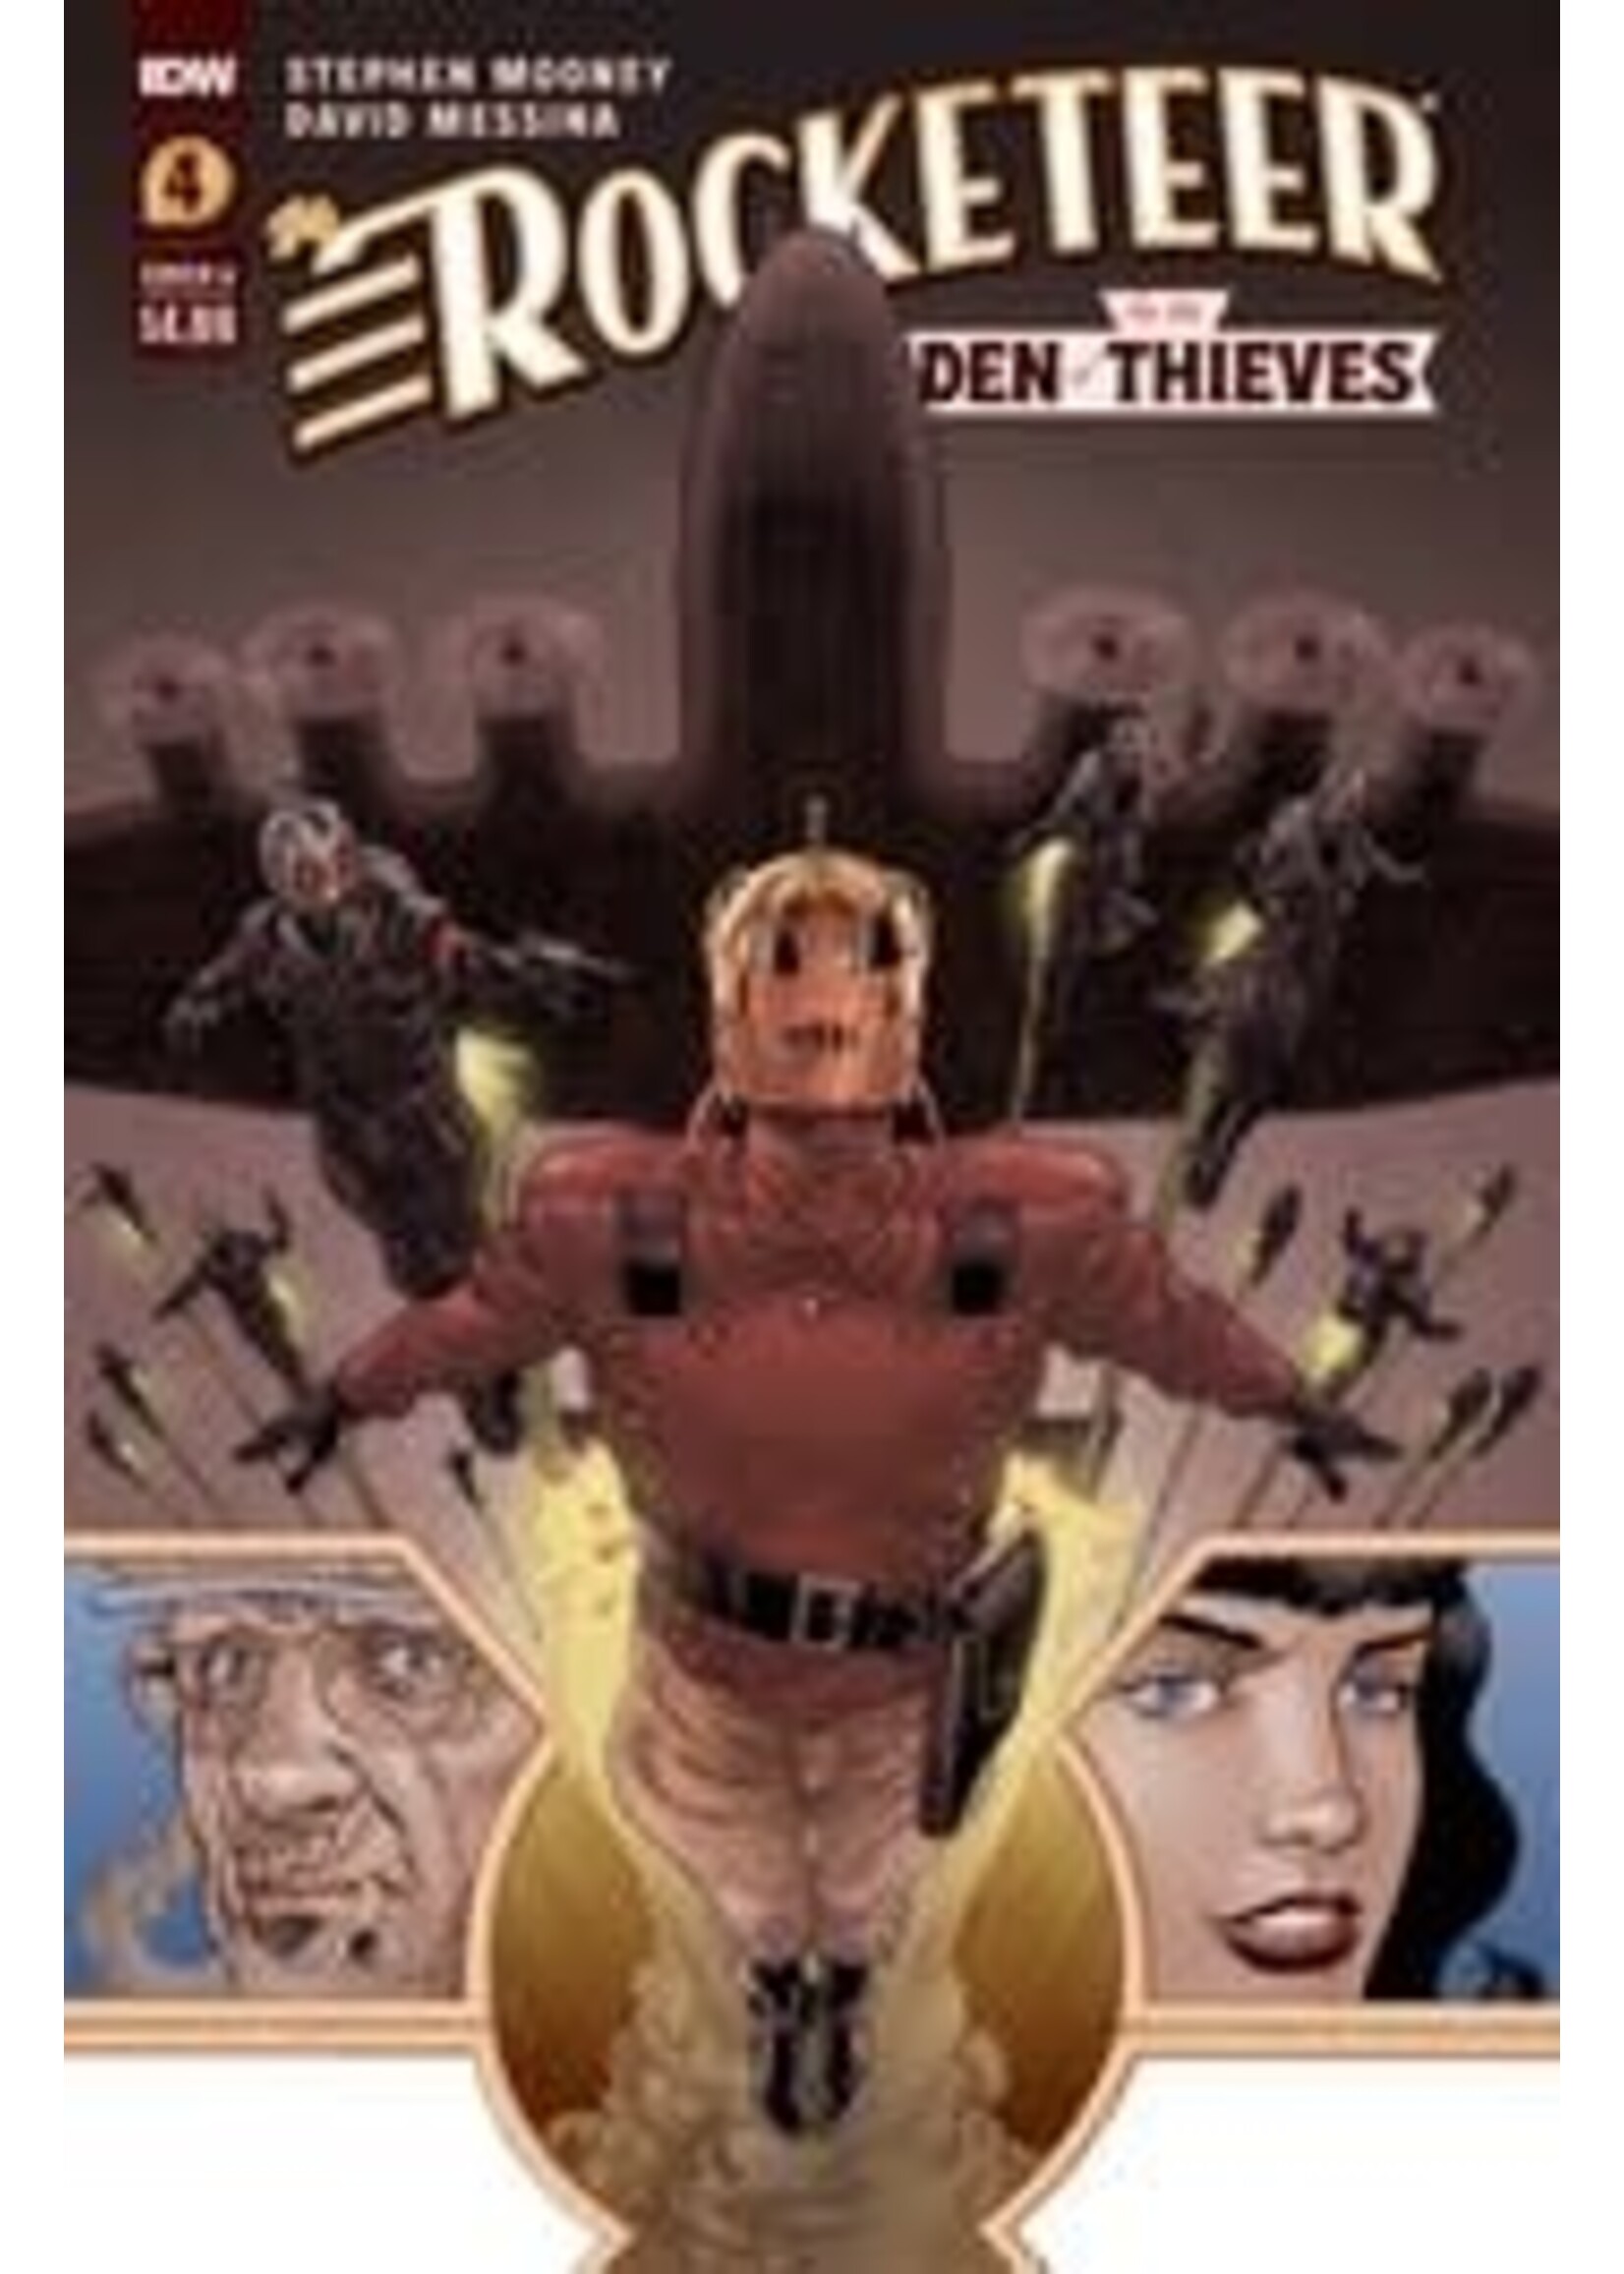 IDW PUBLISHING ROCKETEER IN THE DEN OF THIEVES complete 4 issues series